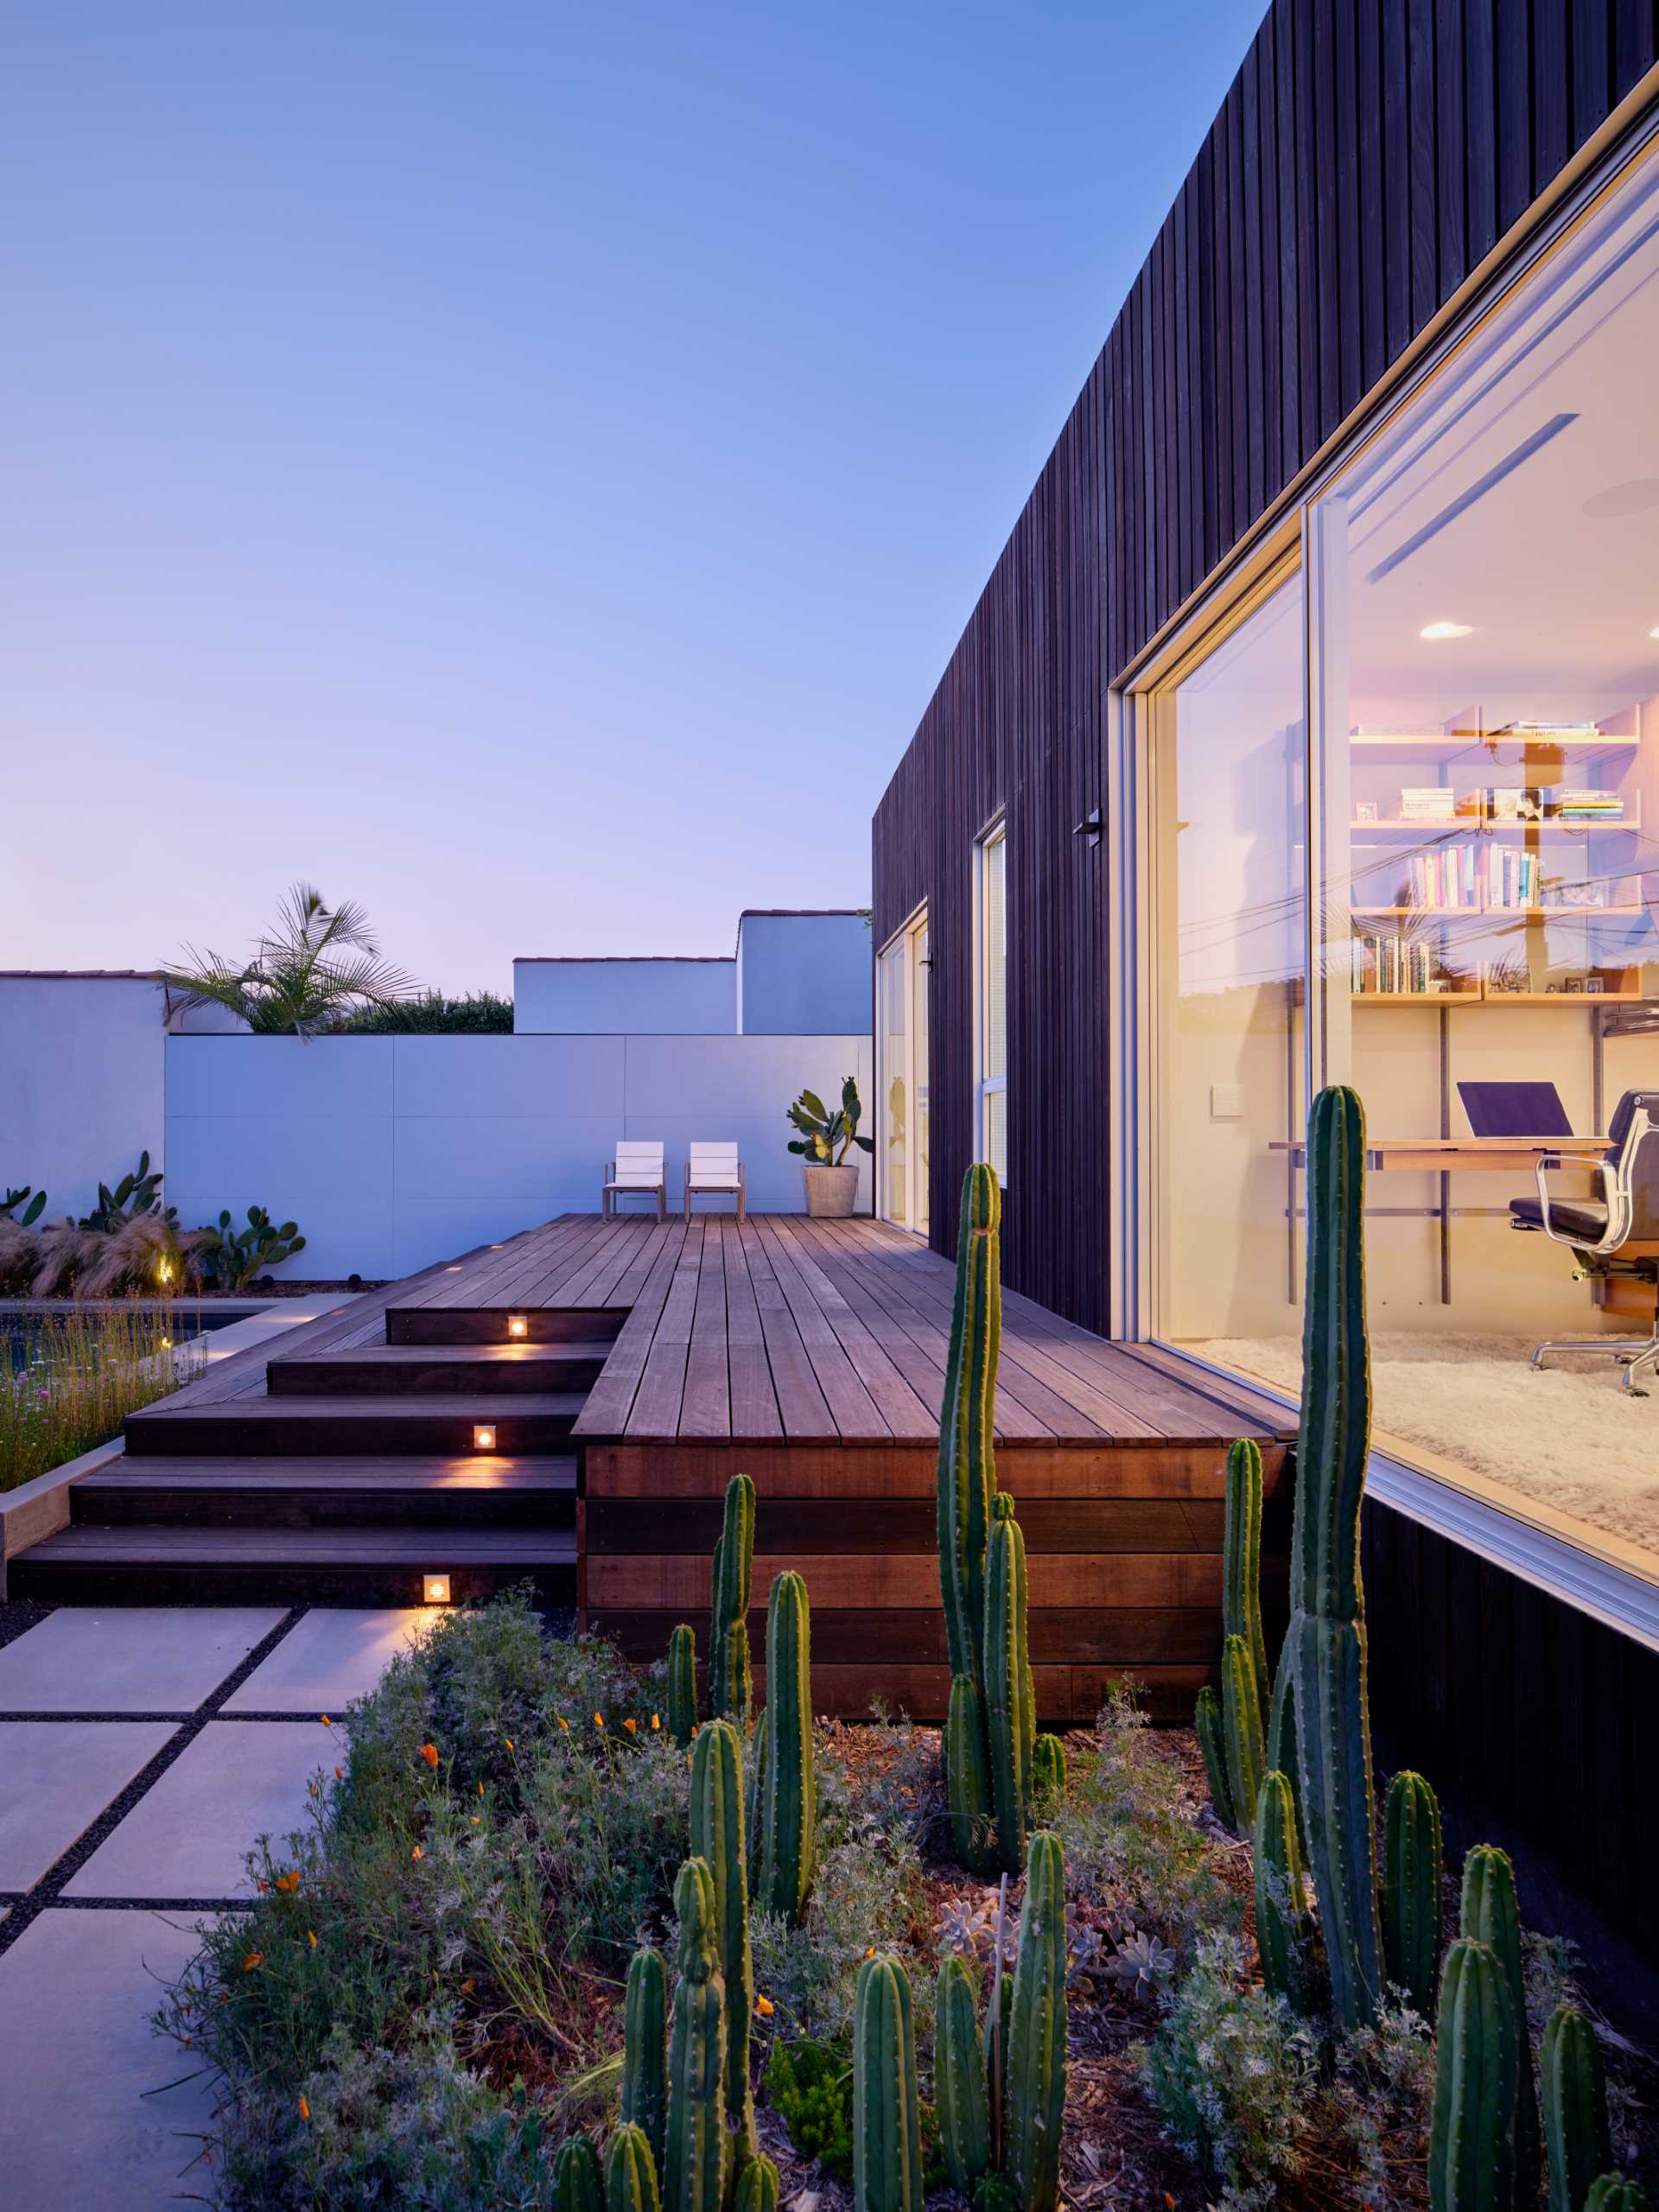 At the rear of the home, there's a wood deck and small dedicated planters that are filled with easy-to-care for plants.